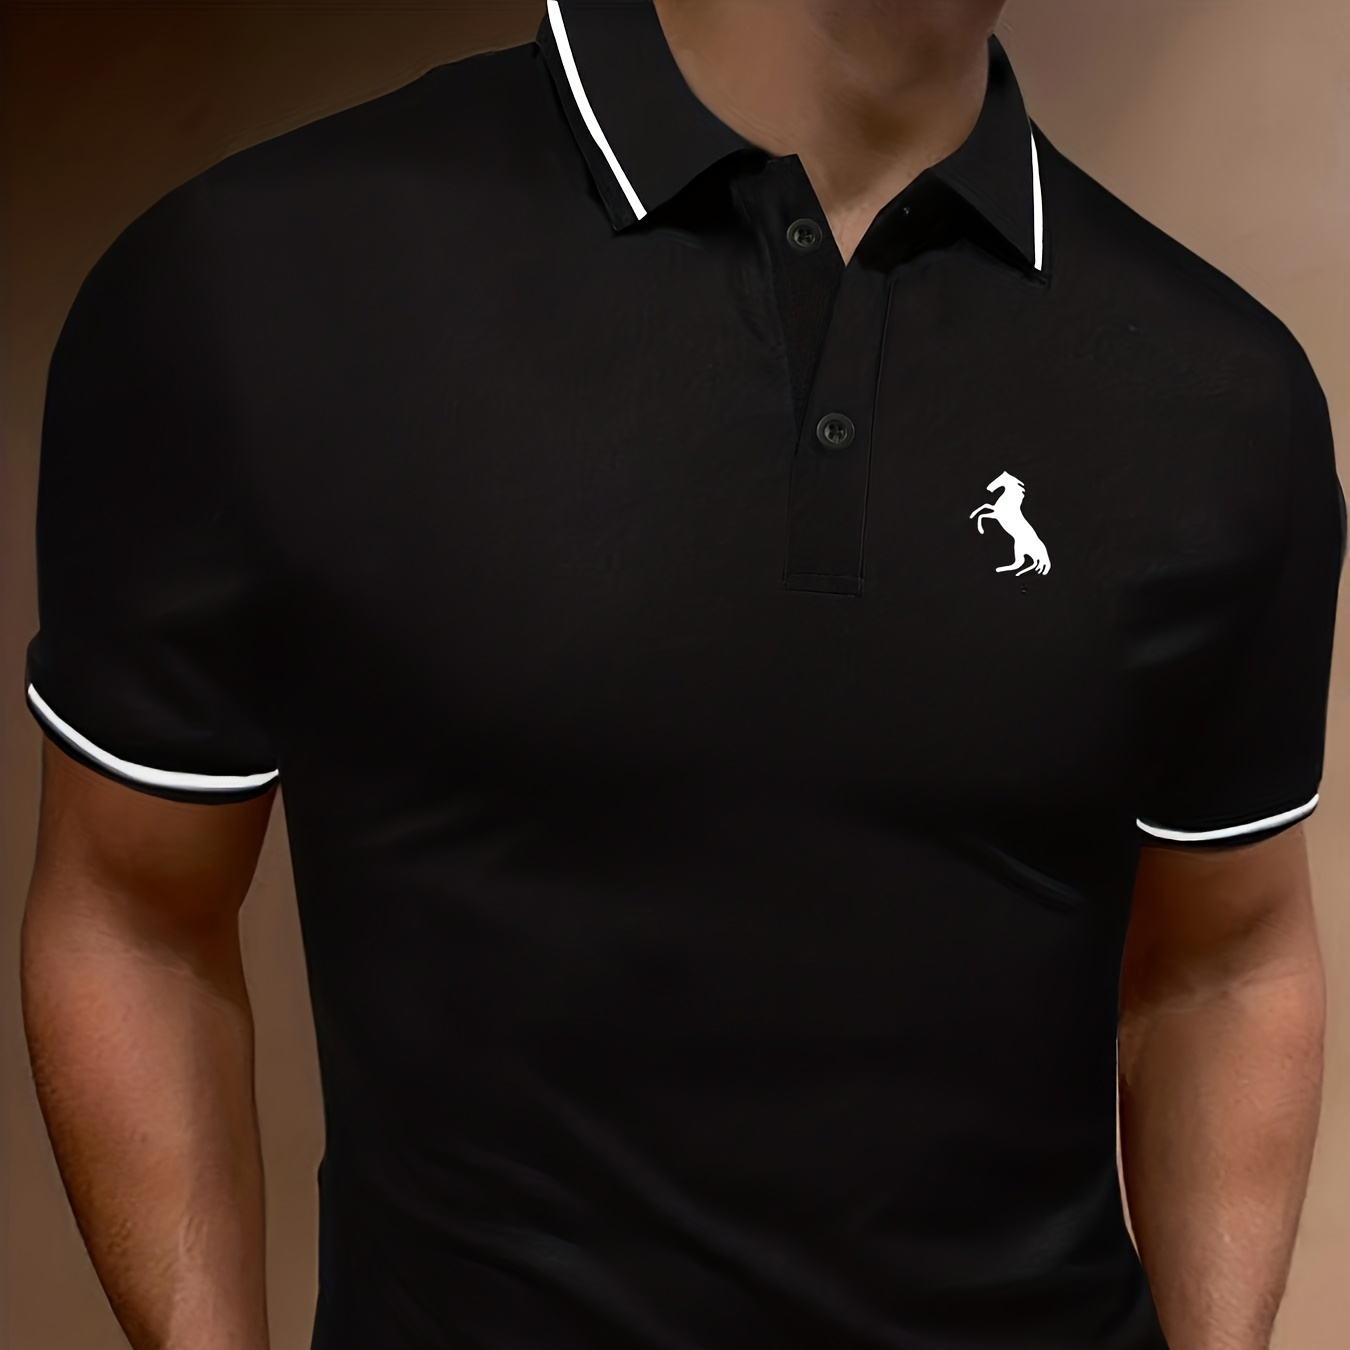 

Horse Print Summer Men's Fashionable Lapel Short Sleeve T-shirt, Suitable For Commercial Entertainment Occasions, Such As Tennis And Golf, Men's Clothing, As Gifts